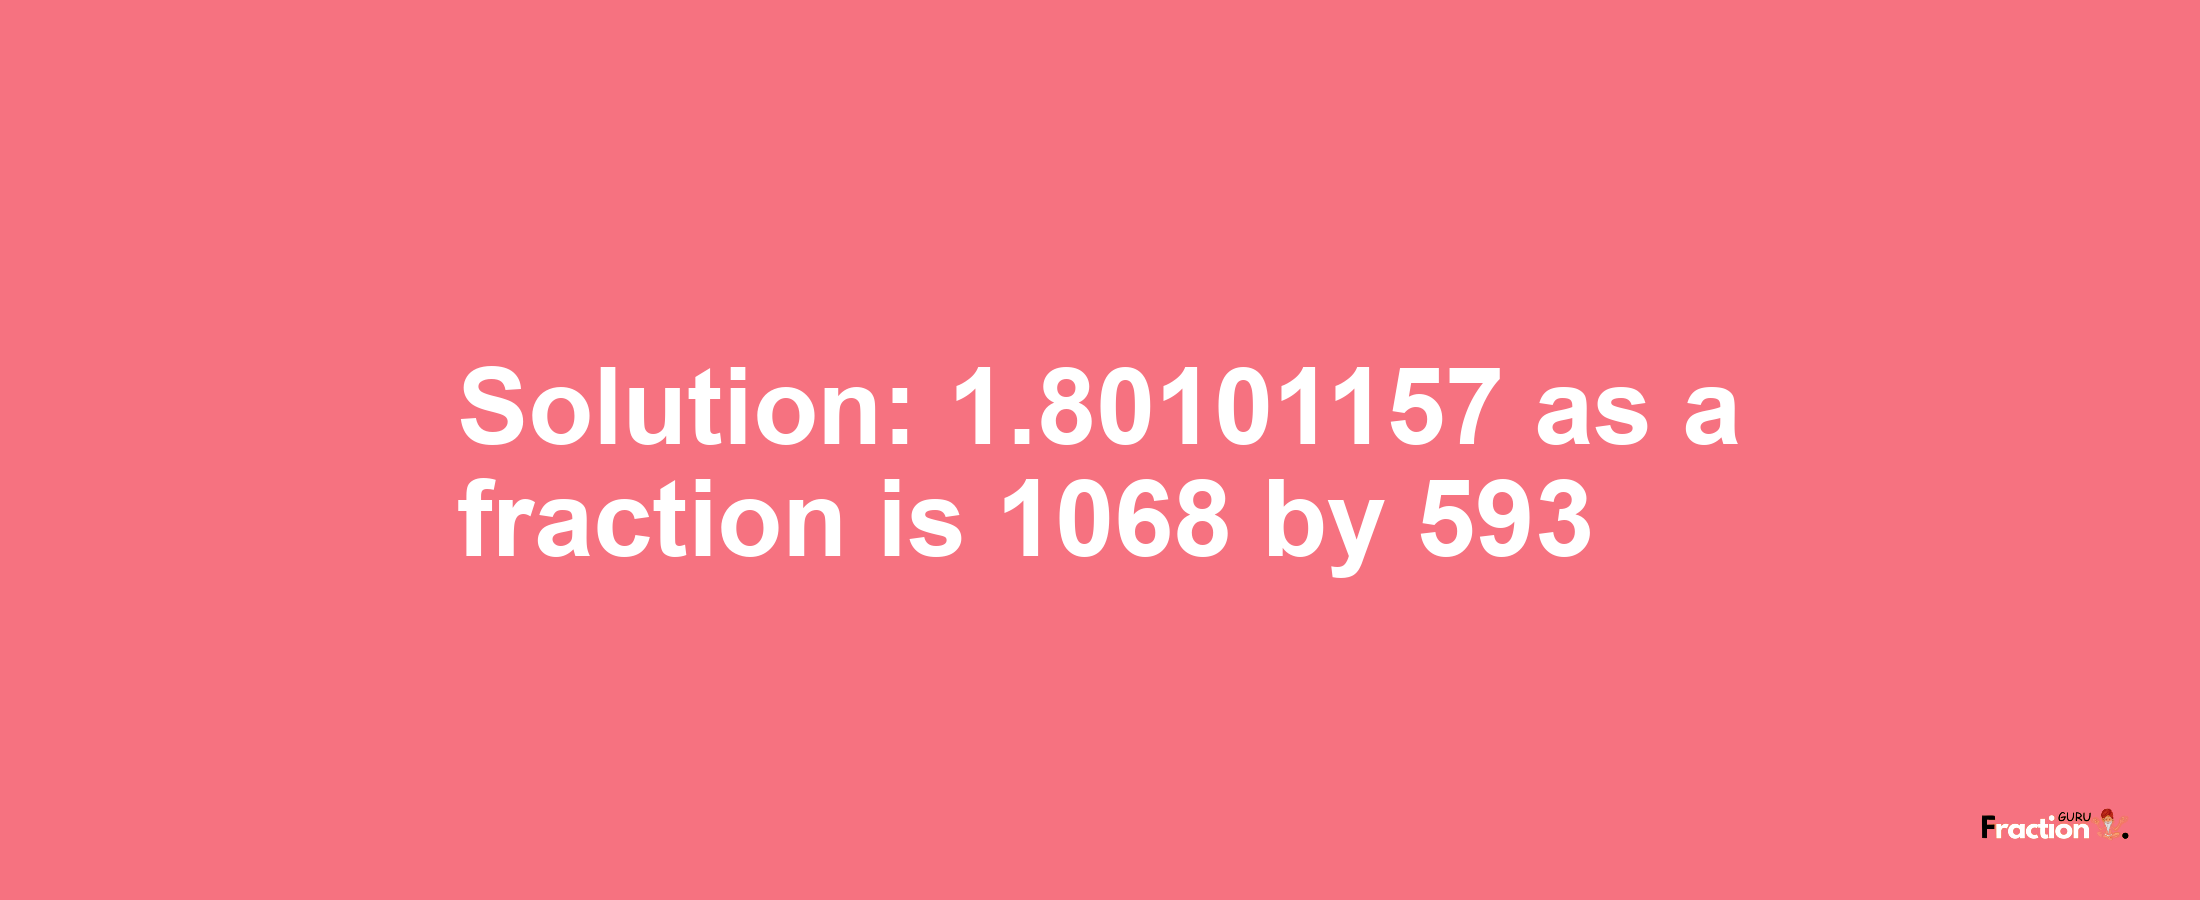 Solution:1.80101157 as a fraction is 1068/593